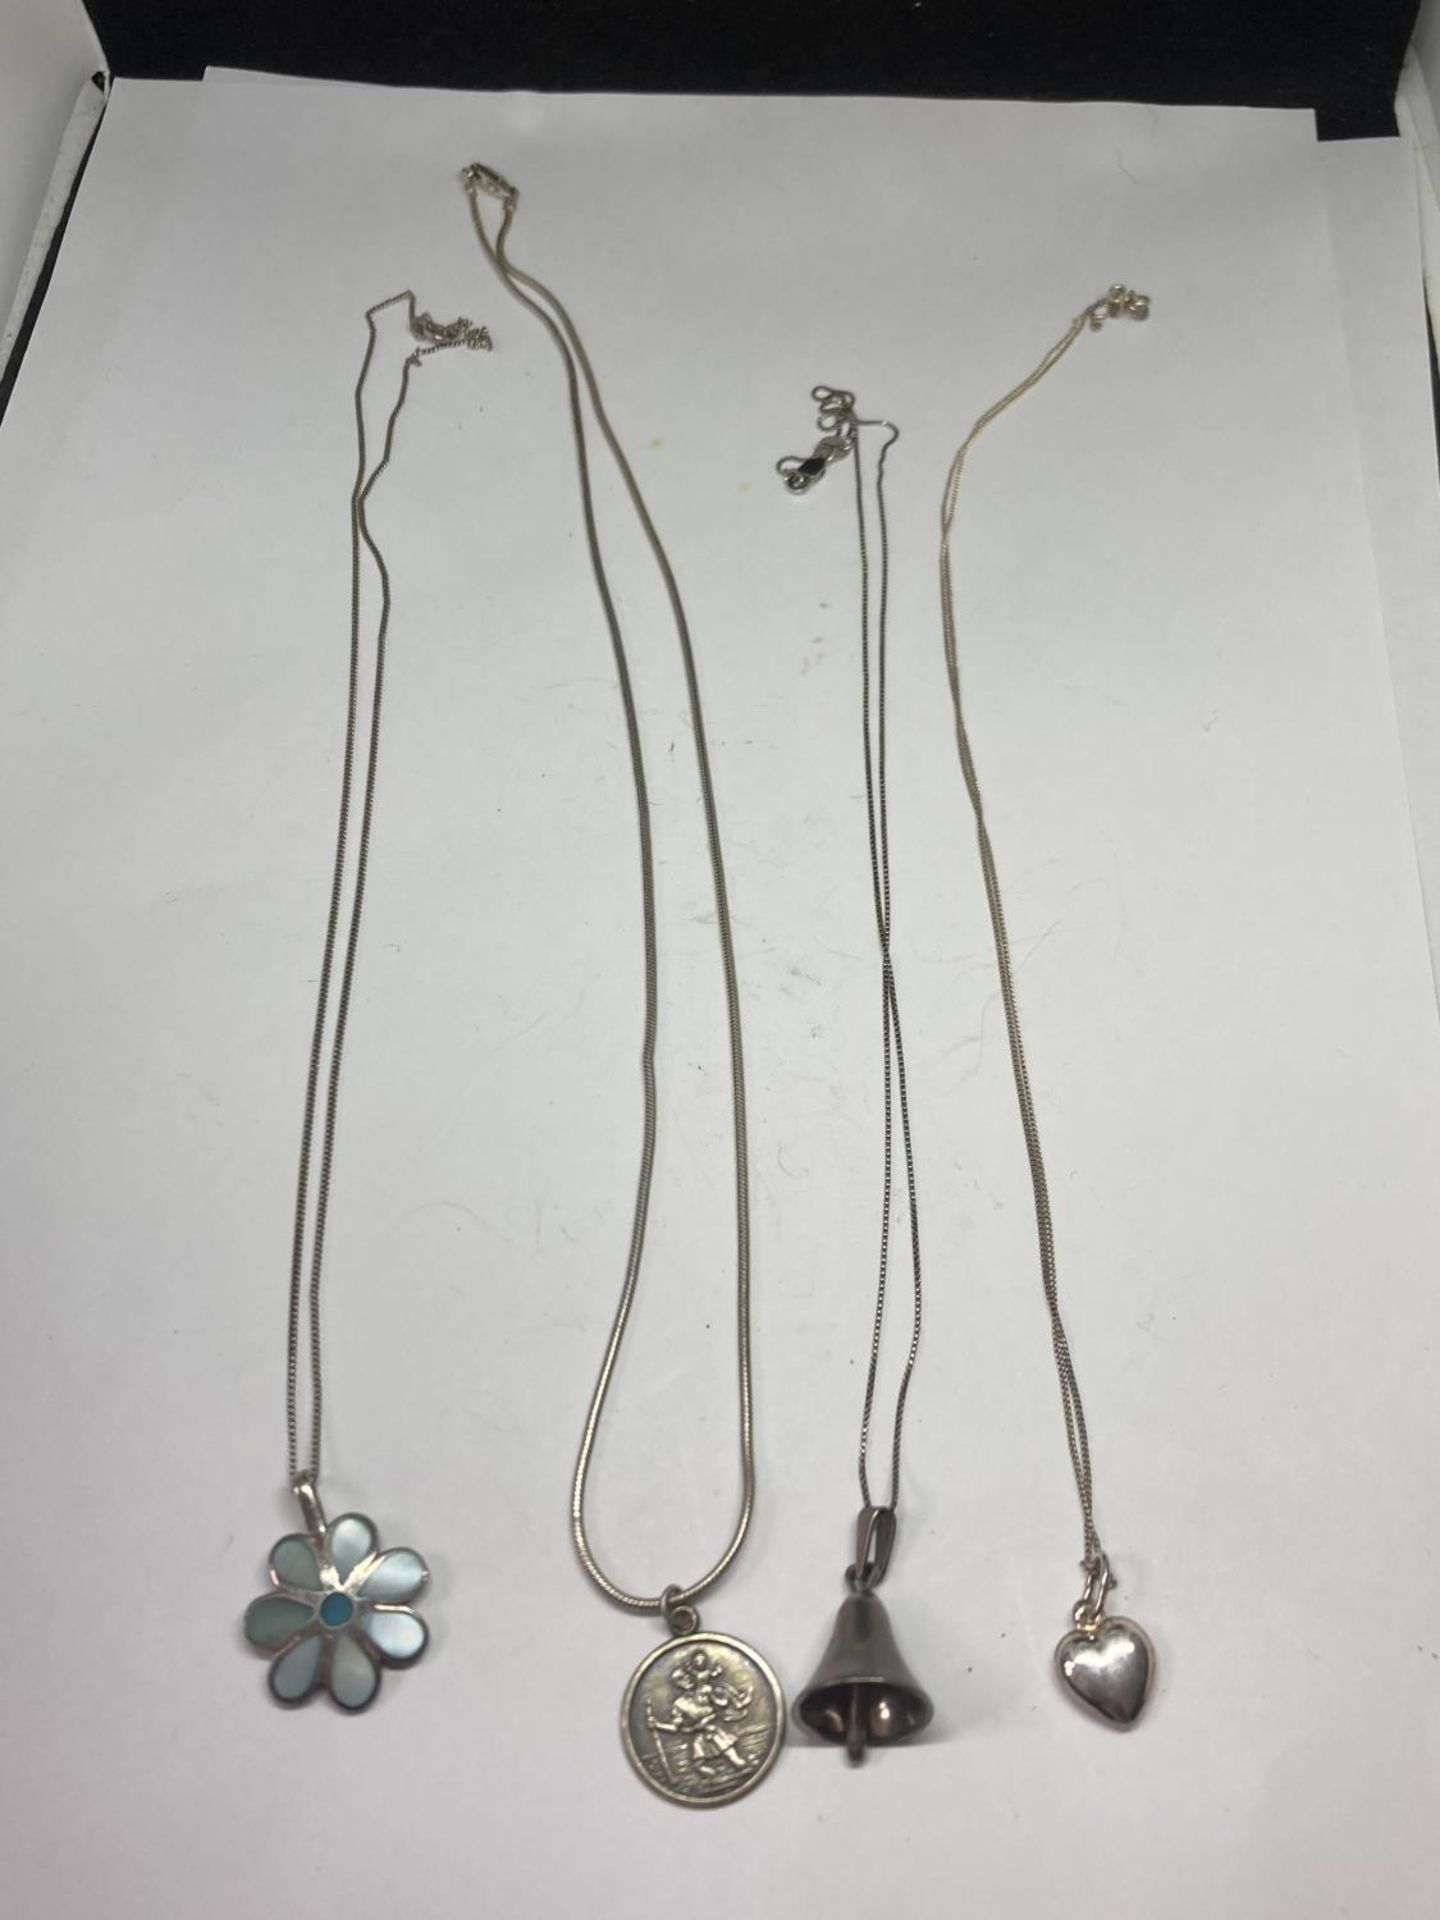 FOUR SIVER NECKLACES WITH PENDANTS